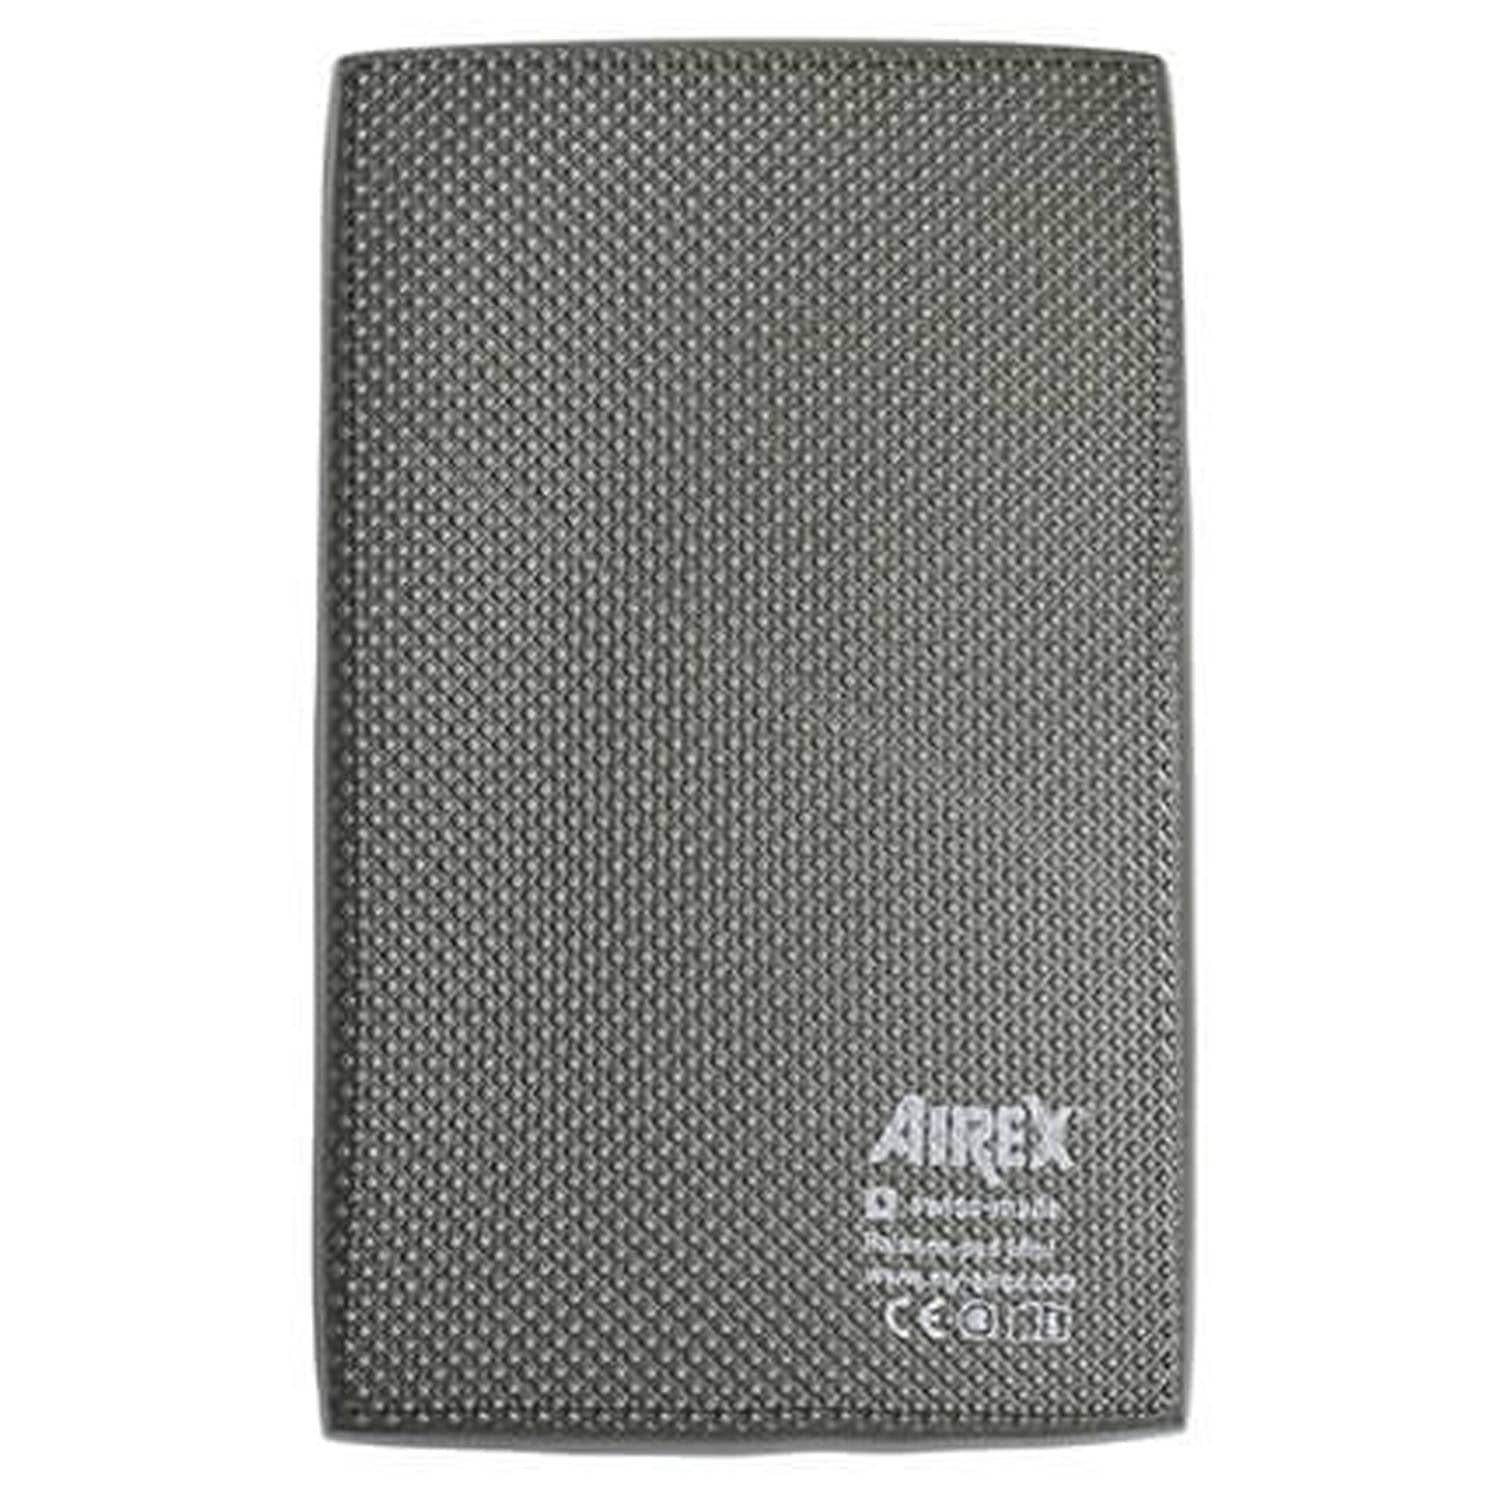 AIREX® Balance Pad XL | Power Systems